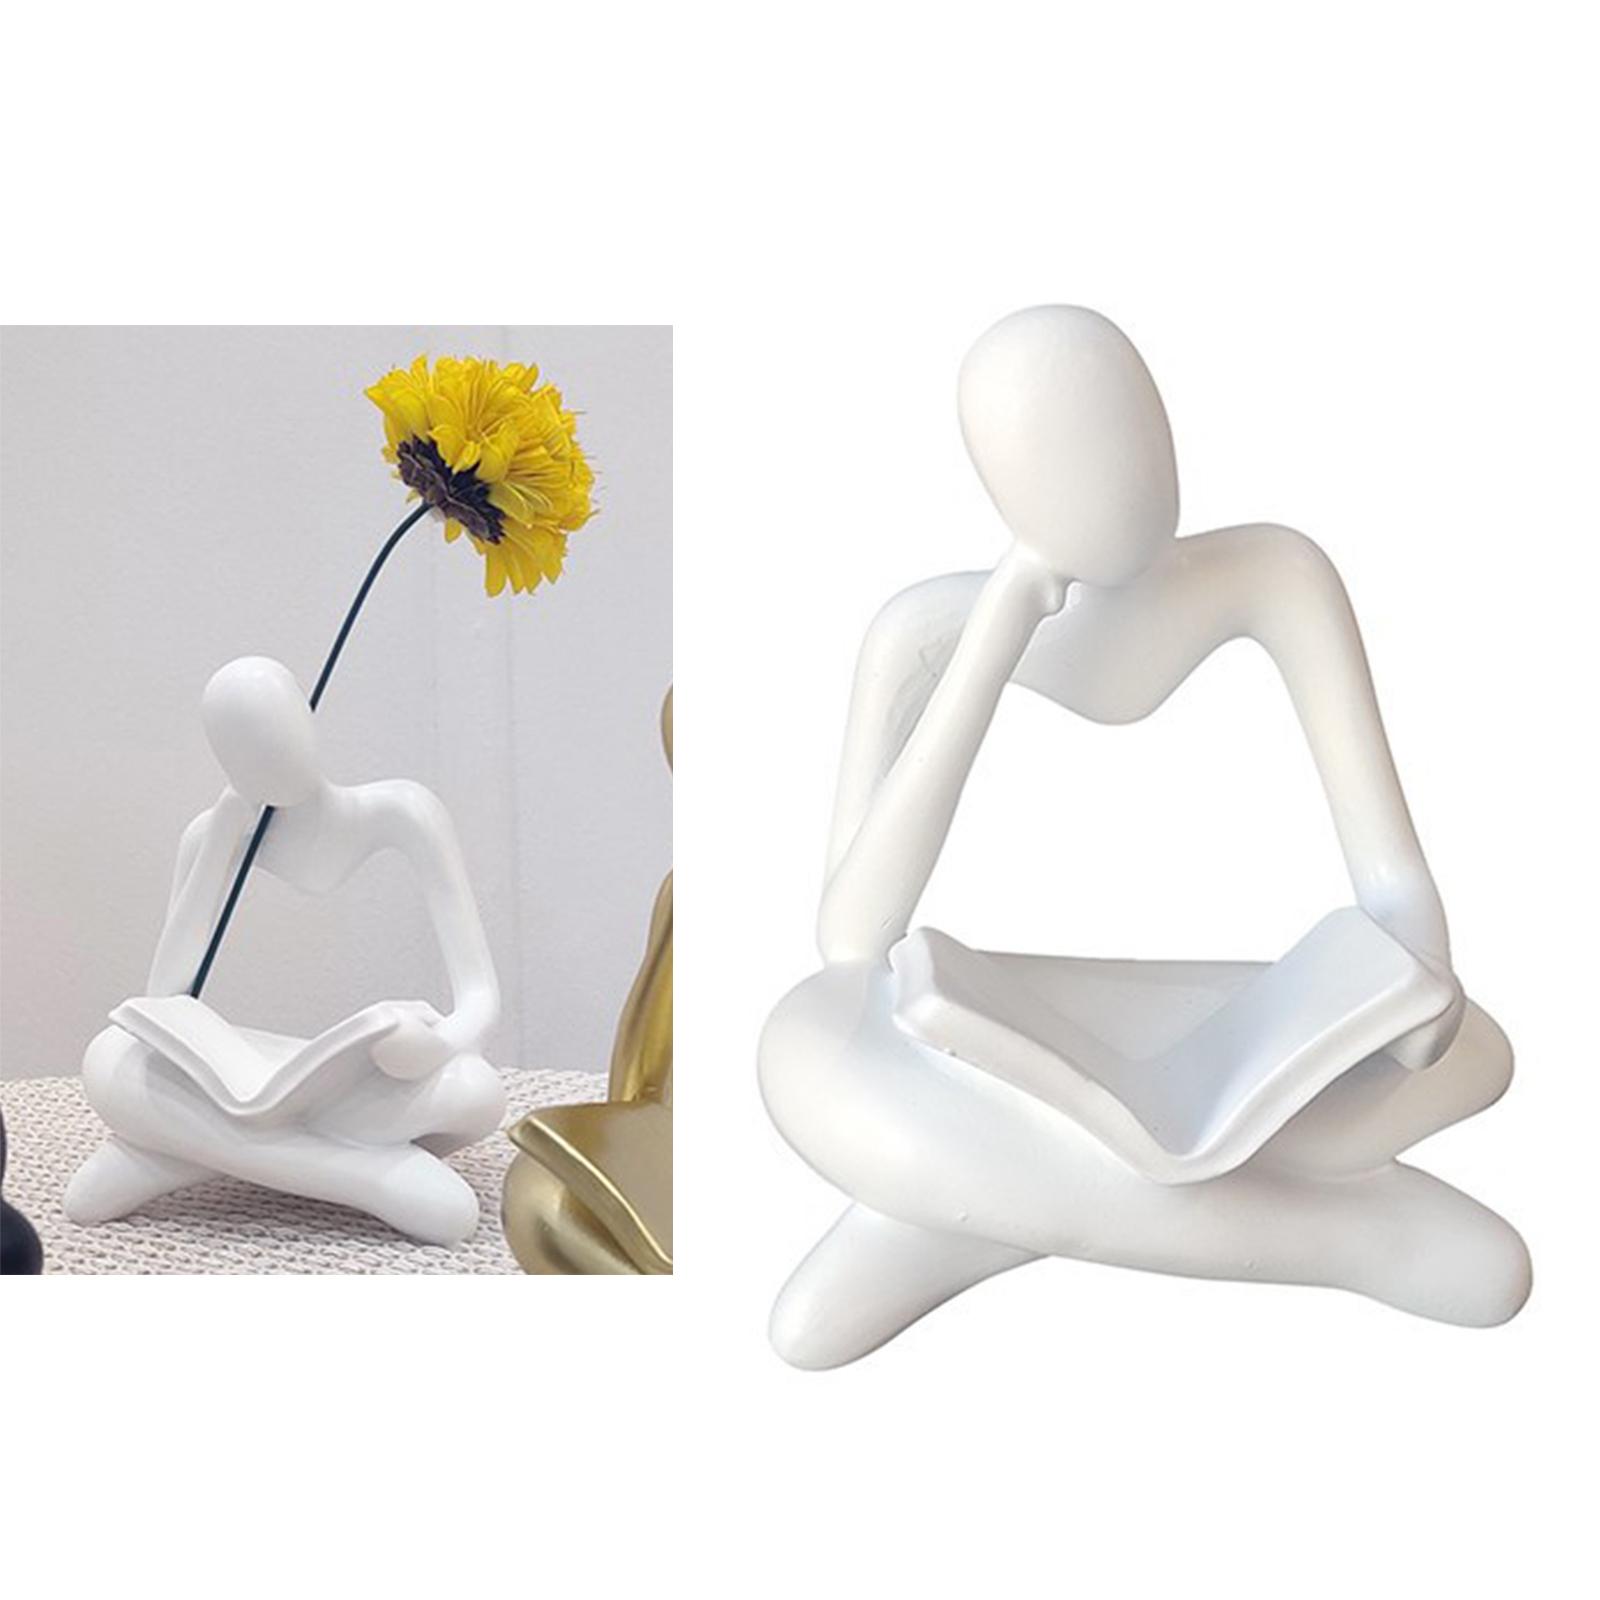 Abstract Thinker Statue Tabletop Decorative Sculpture for Home Hotel Decor White